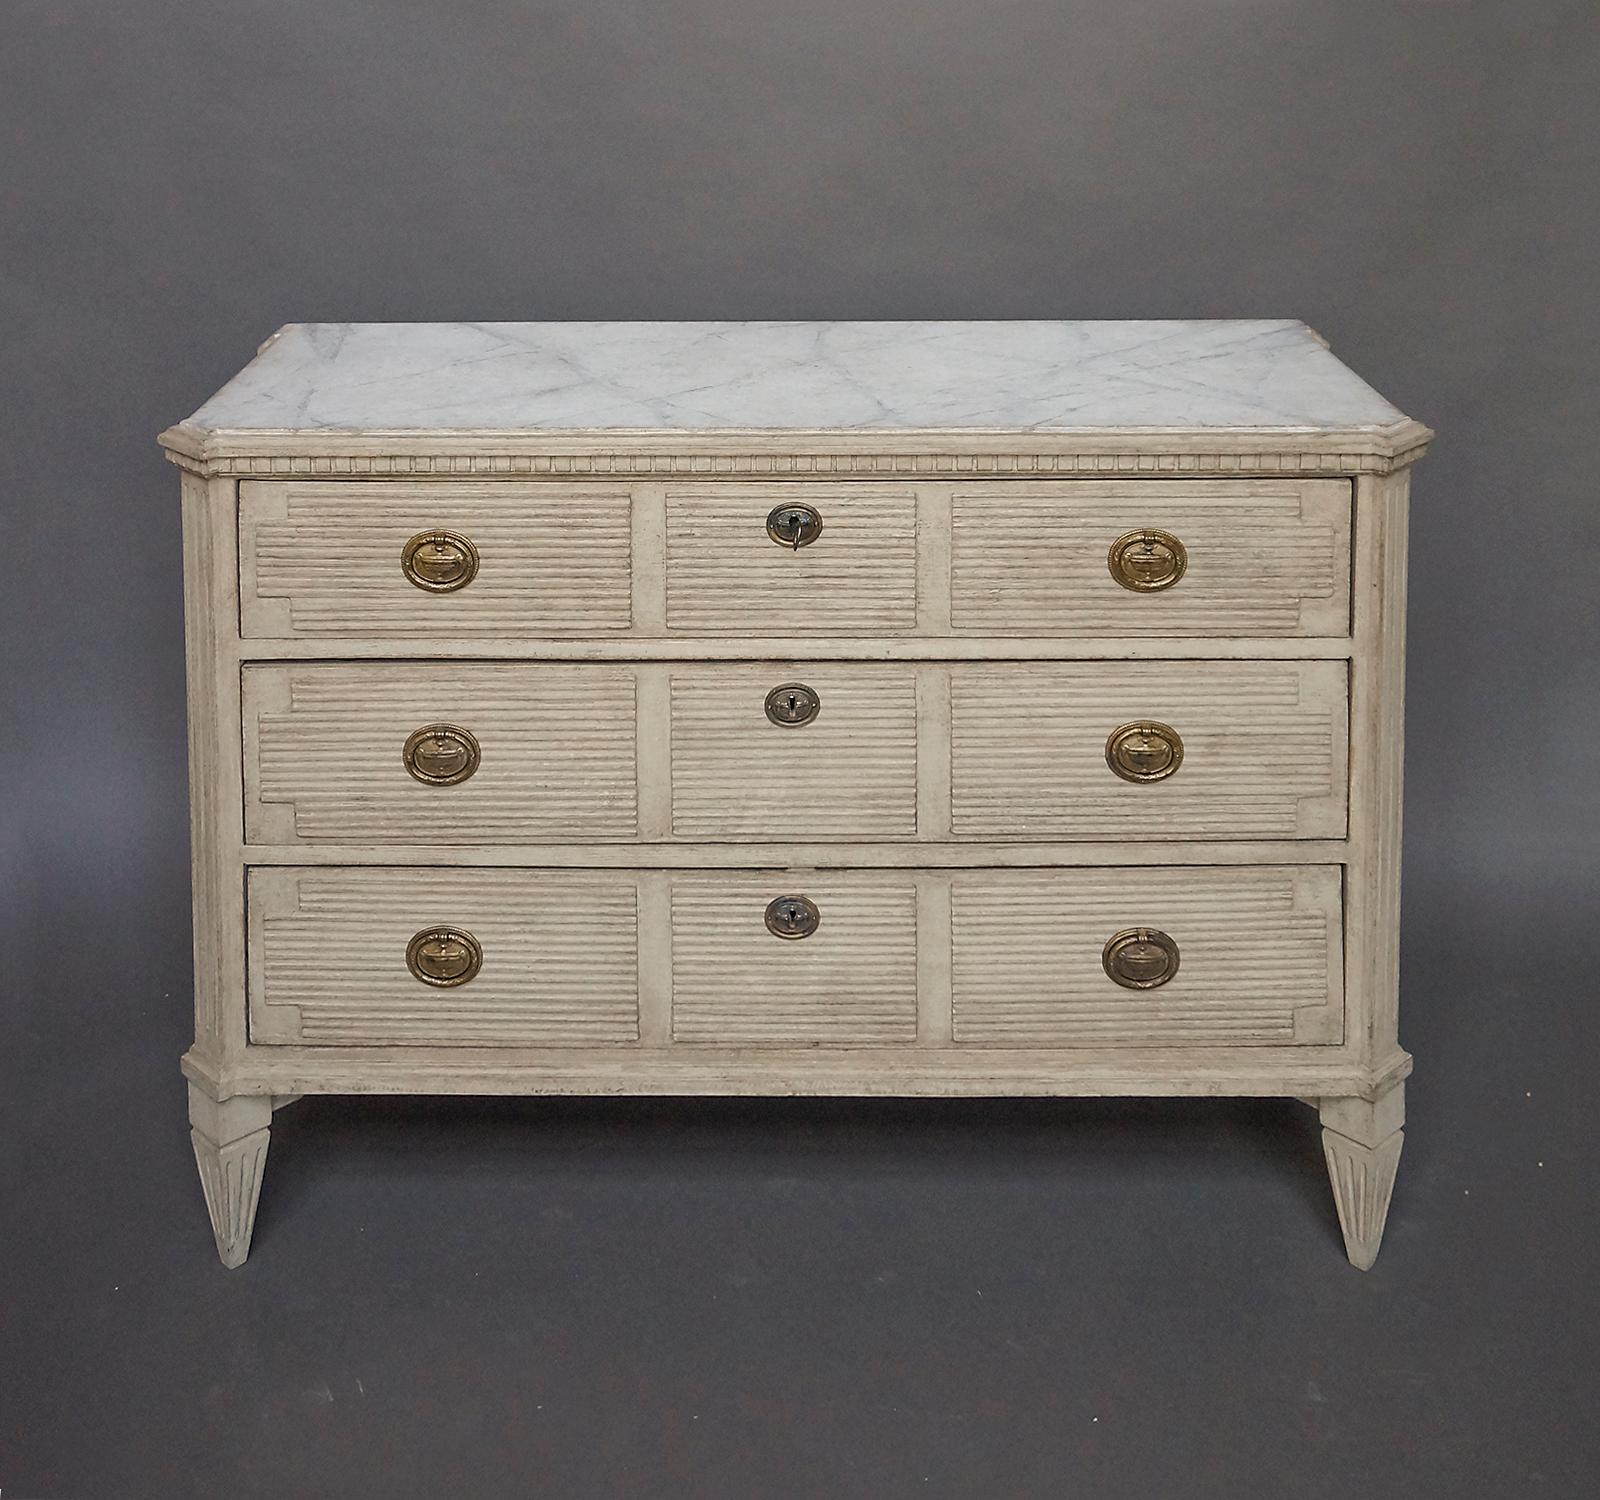 Swedish chest of drawers, circa 1860, with three reeded drawers and brass hardware. Shaped top with marbleized finish and dentil molding. Canted corner posts and tapering square feet.